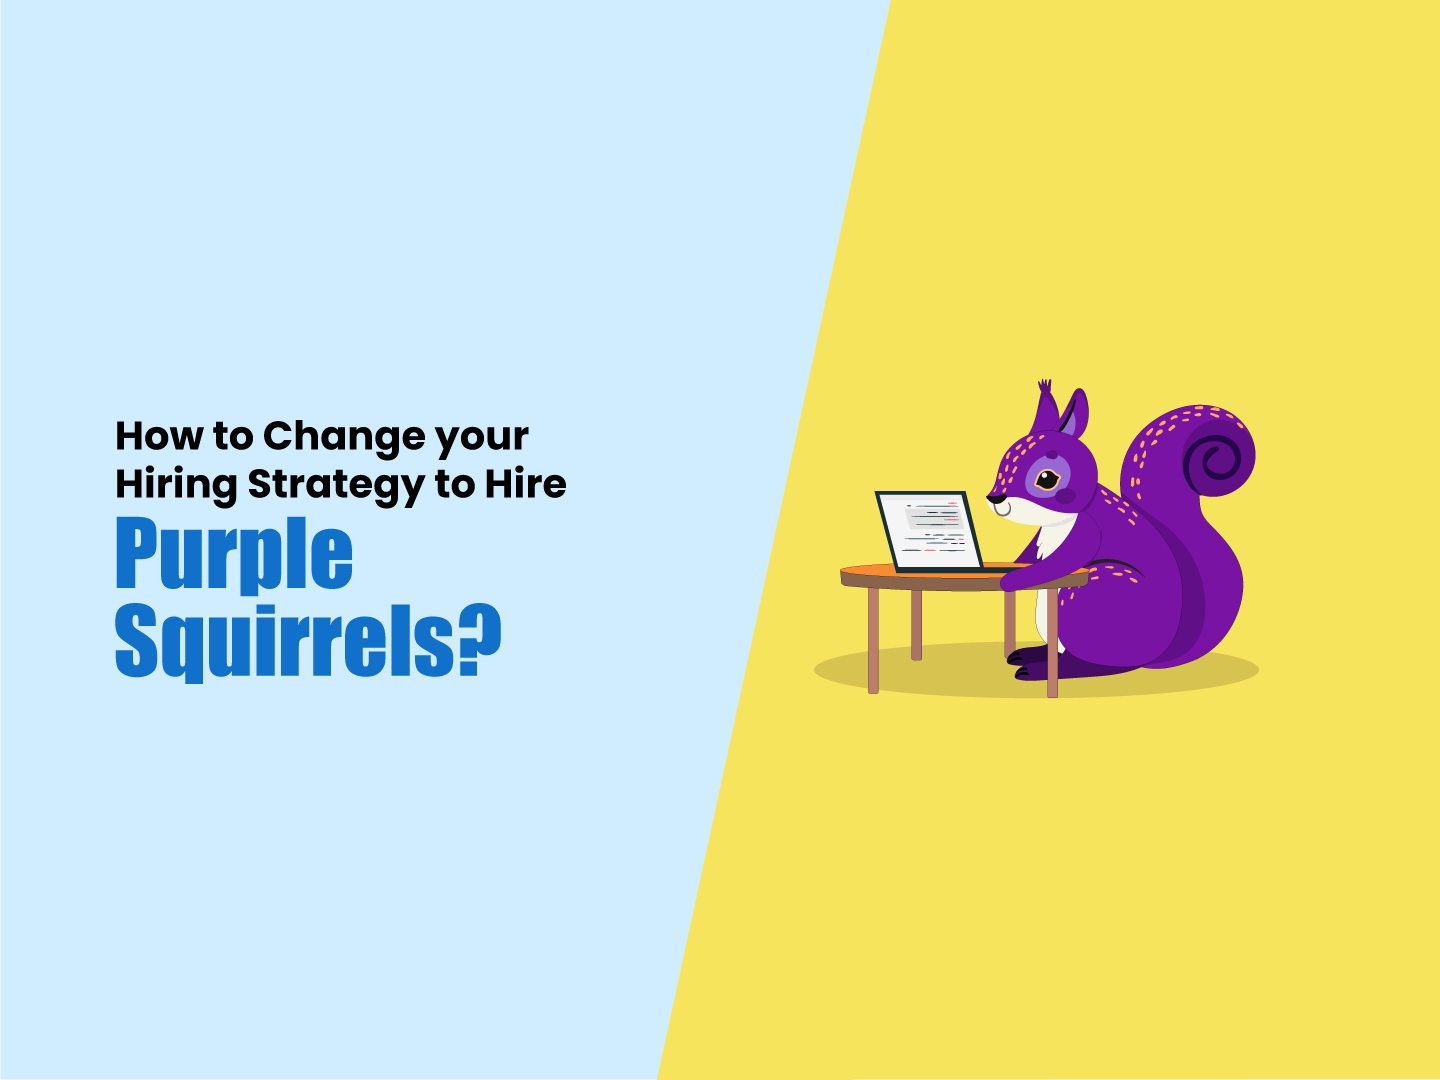 how to change you hiring strategy to purple squirrels